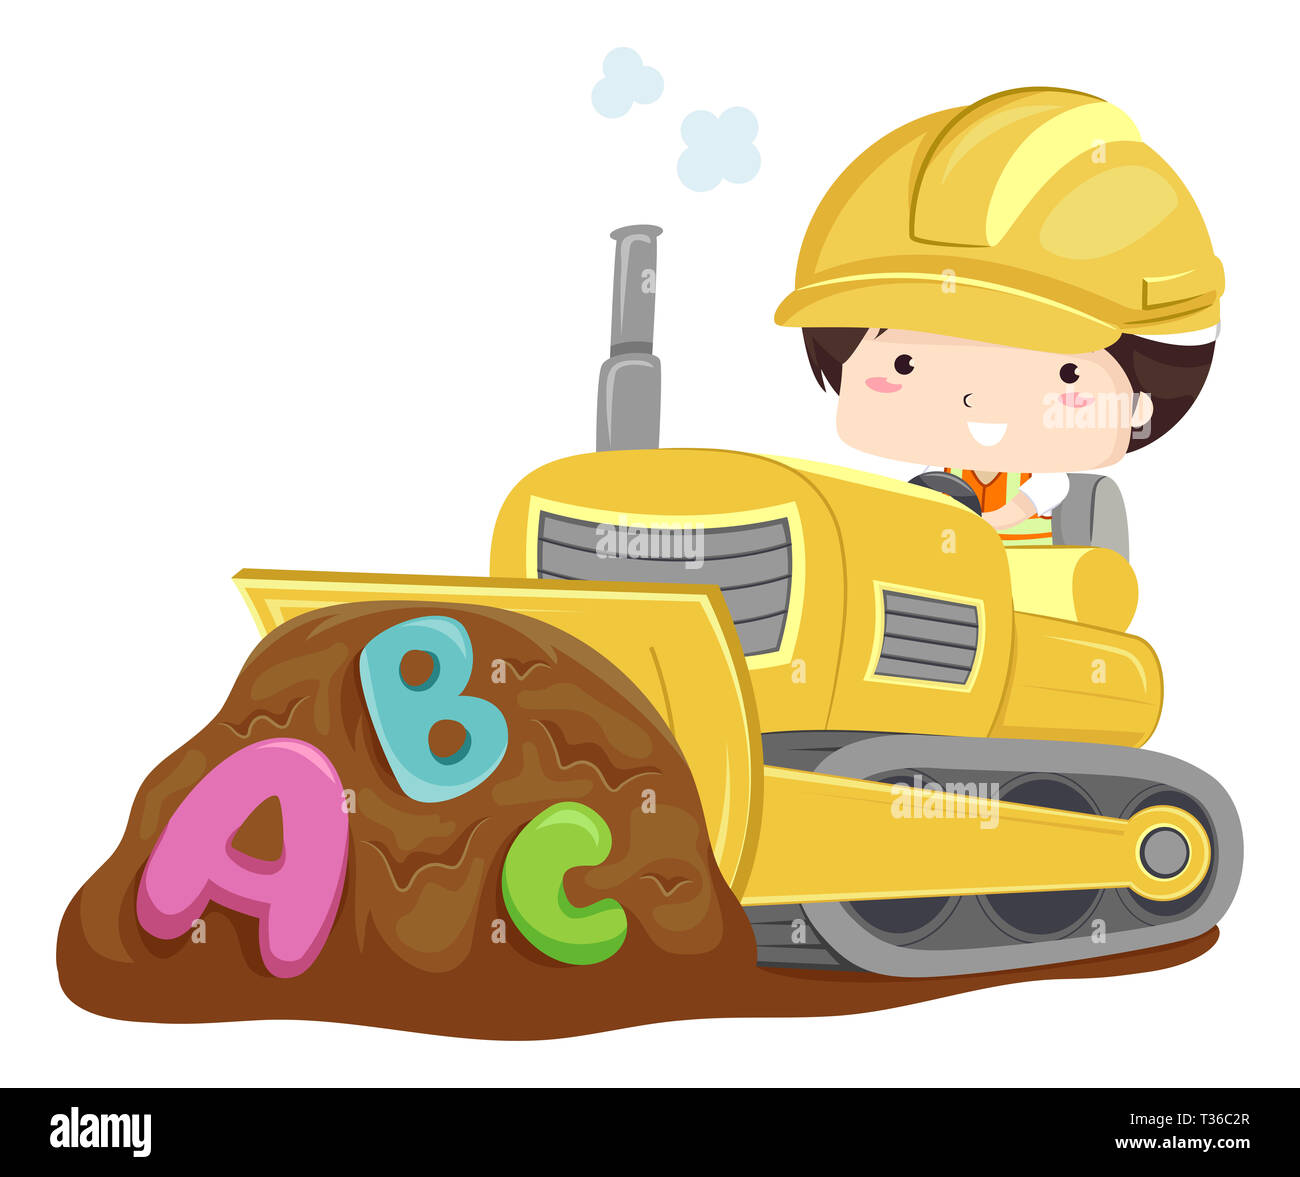 Illustration of a Kid Boy Wearing a Yellow Construction Hard Hat Pushing Soil with ABC Using a Bulldozer Stock Photo